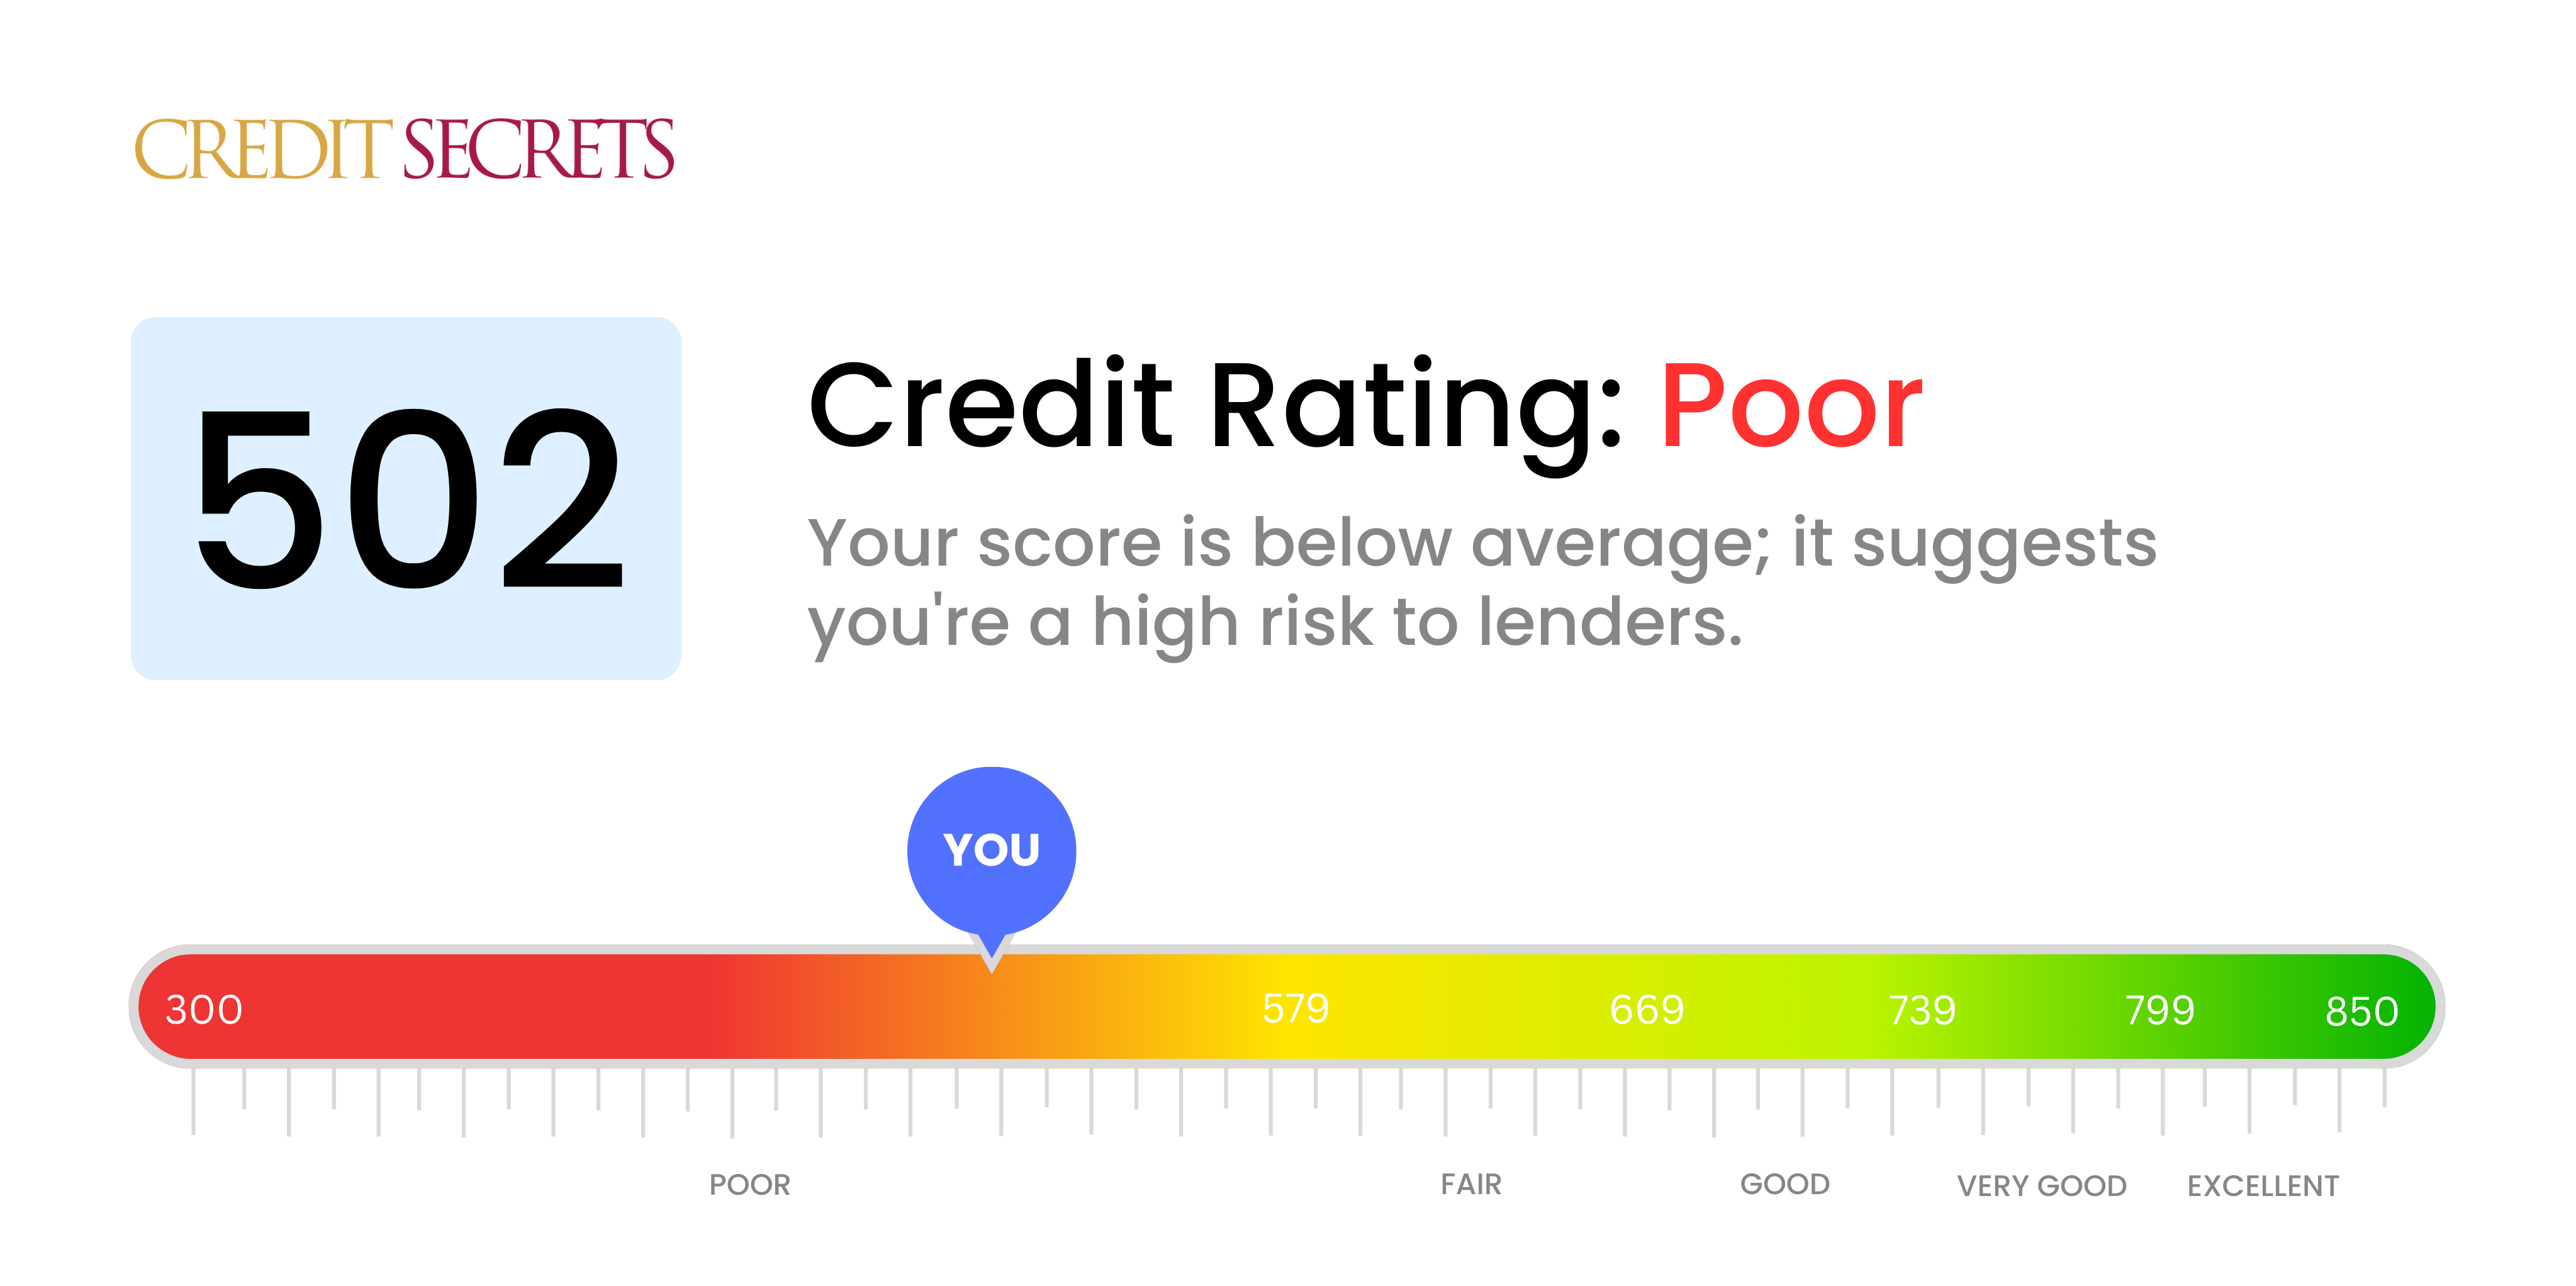 Is 502 a good credit score?